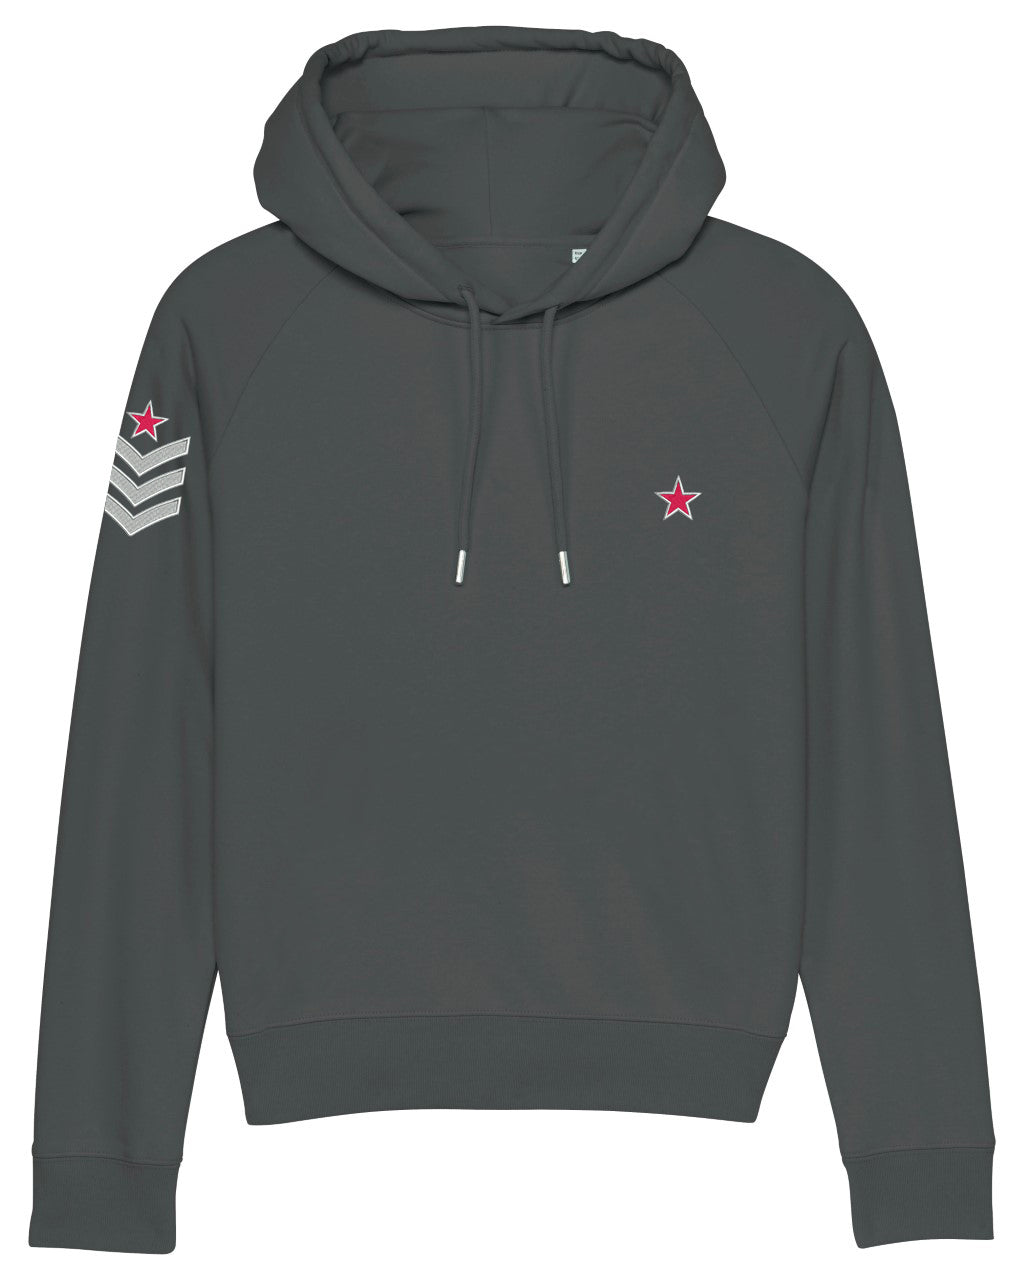 Anthracite Grey Military Style Hoodie